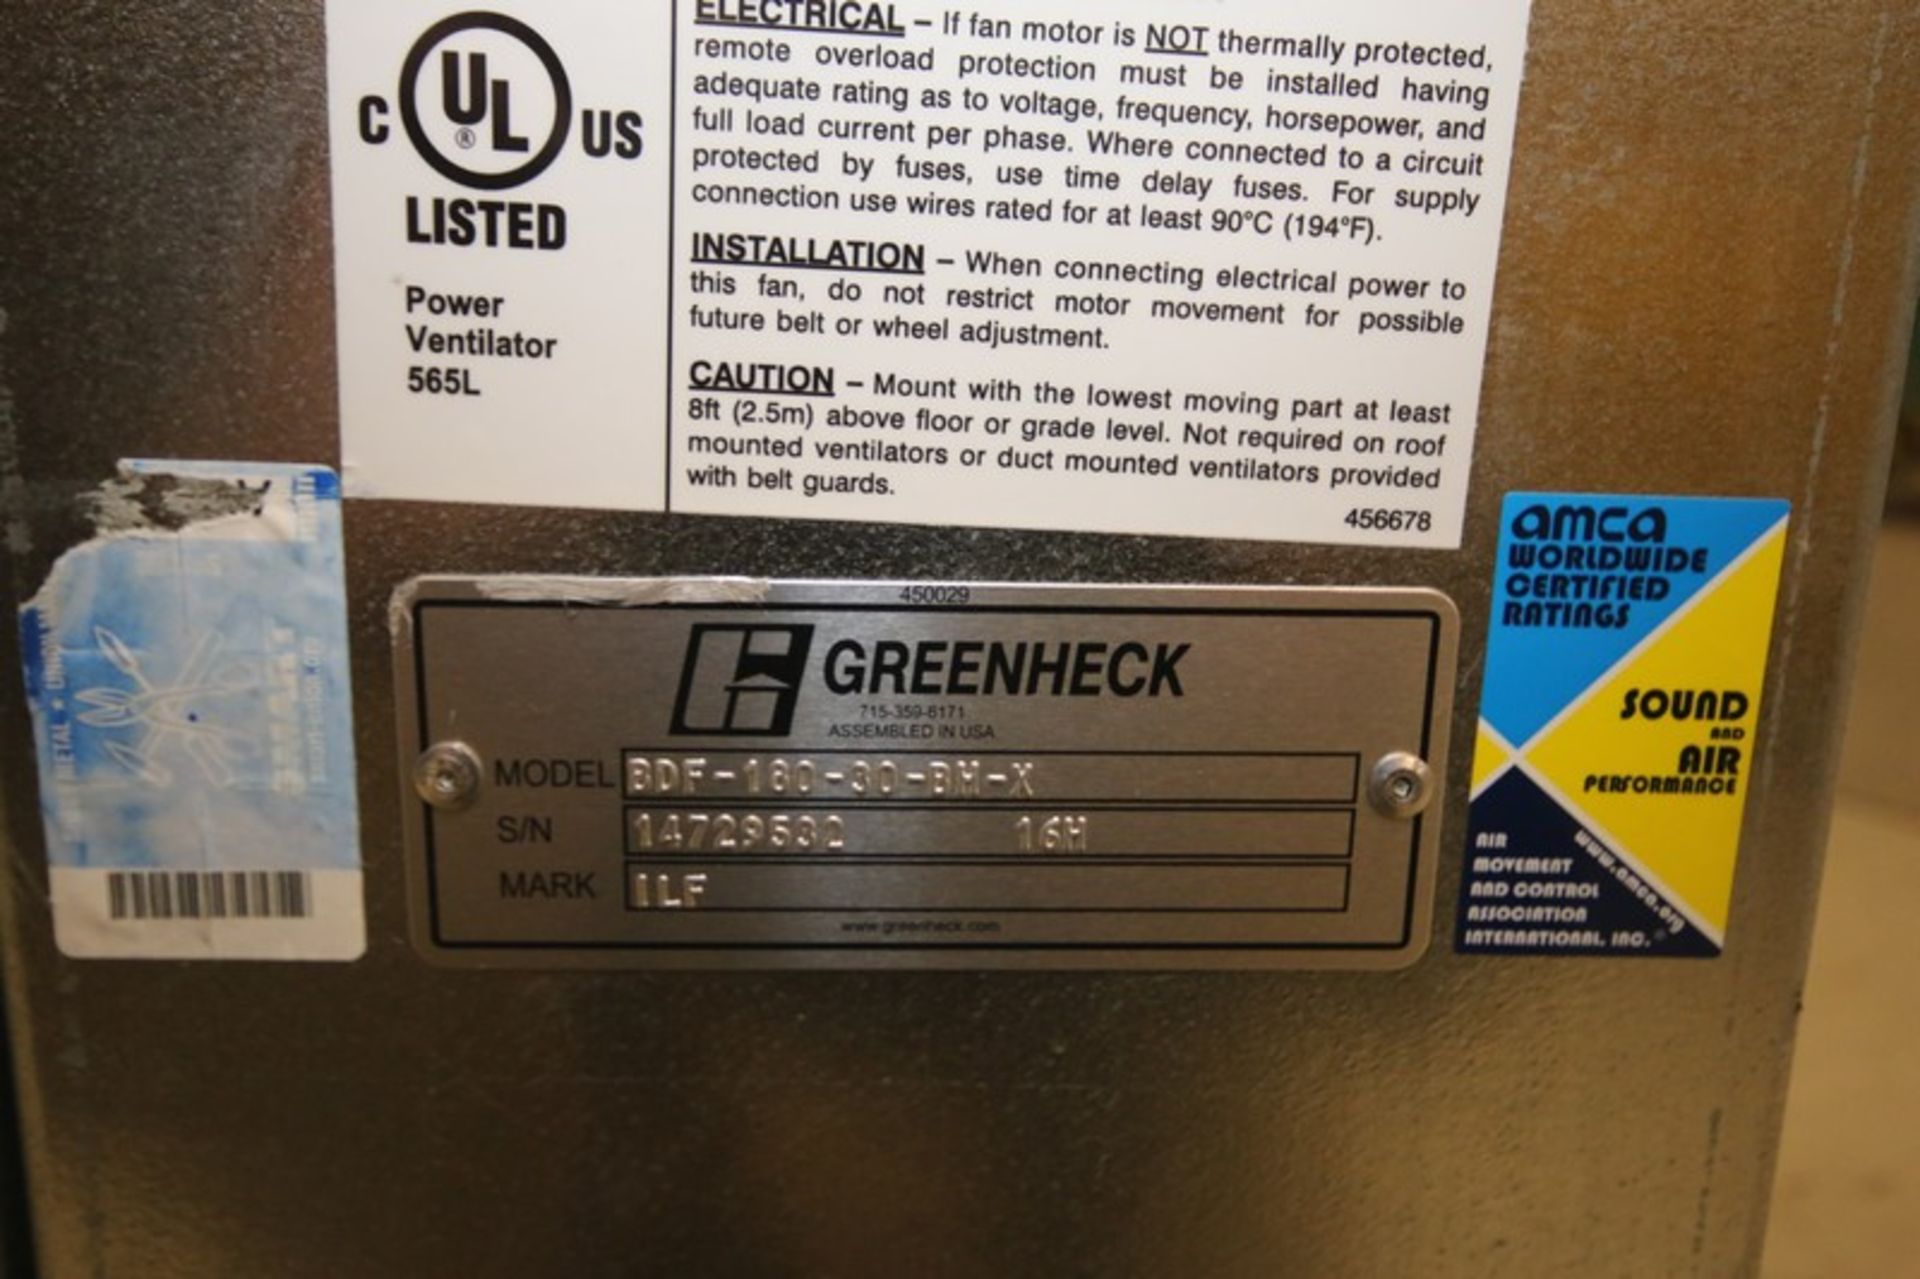 Greenheck 6' L x 42" W x 32" H Horizontal Duct Fan Model BDf-180-30-BH-X, SN 14729532, with Duct, - Image 5 of 5